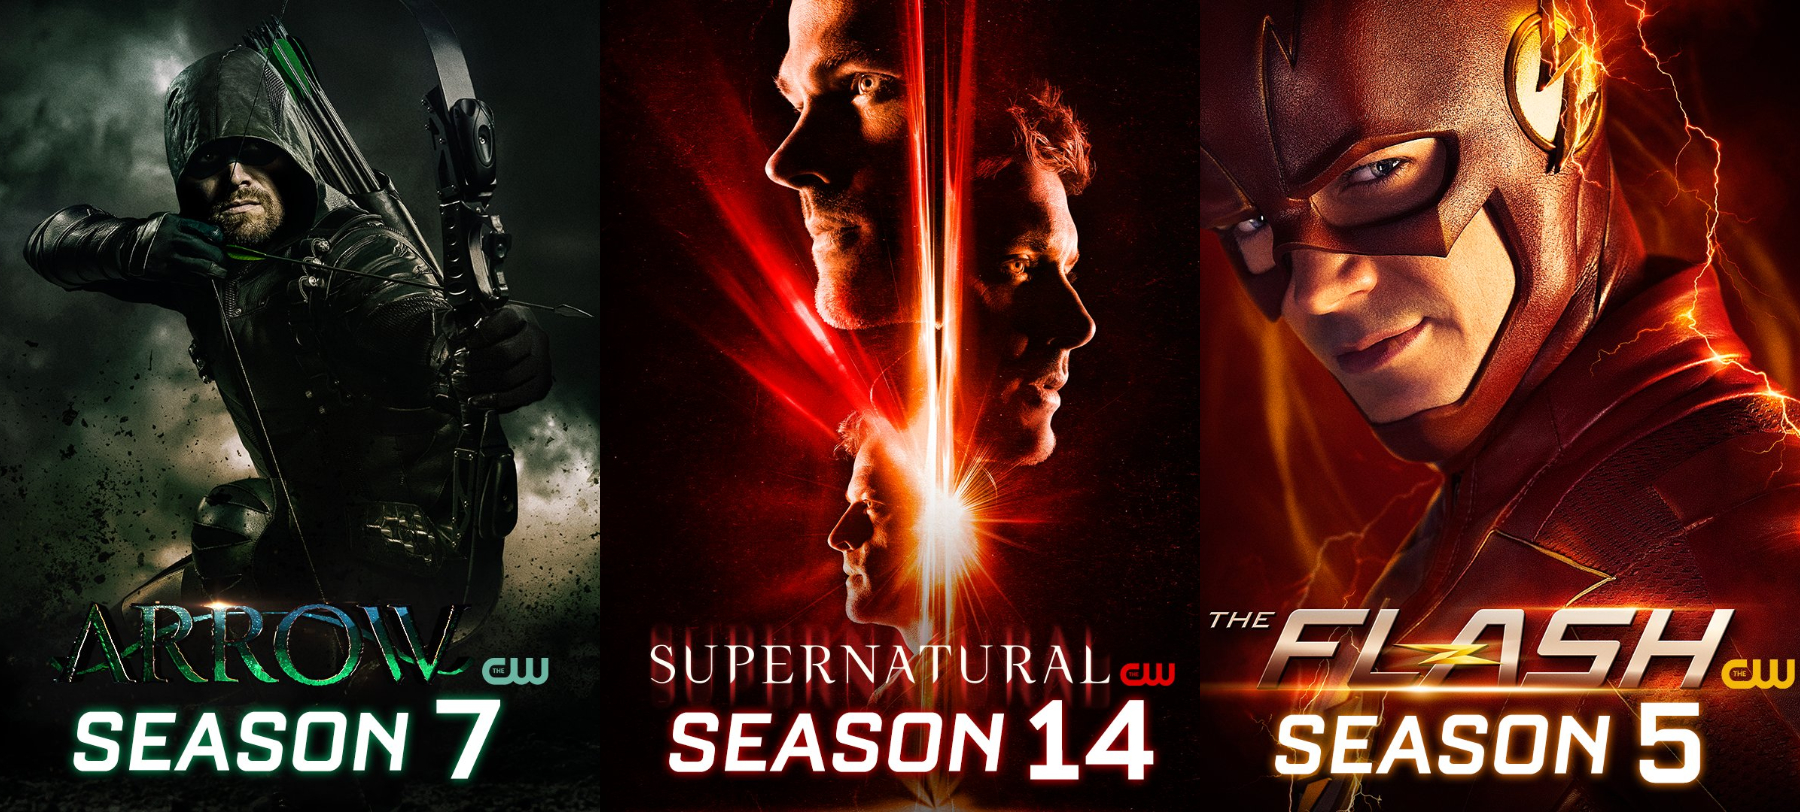 CW’s shows renewals